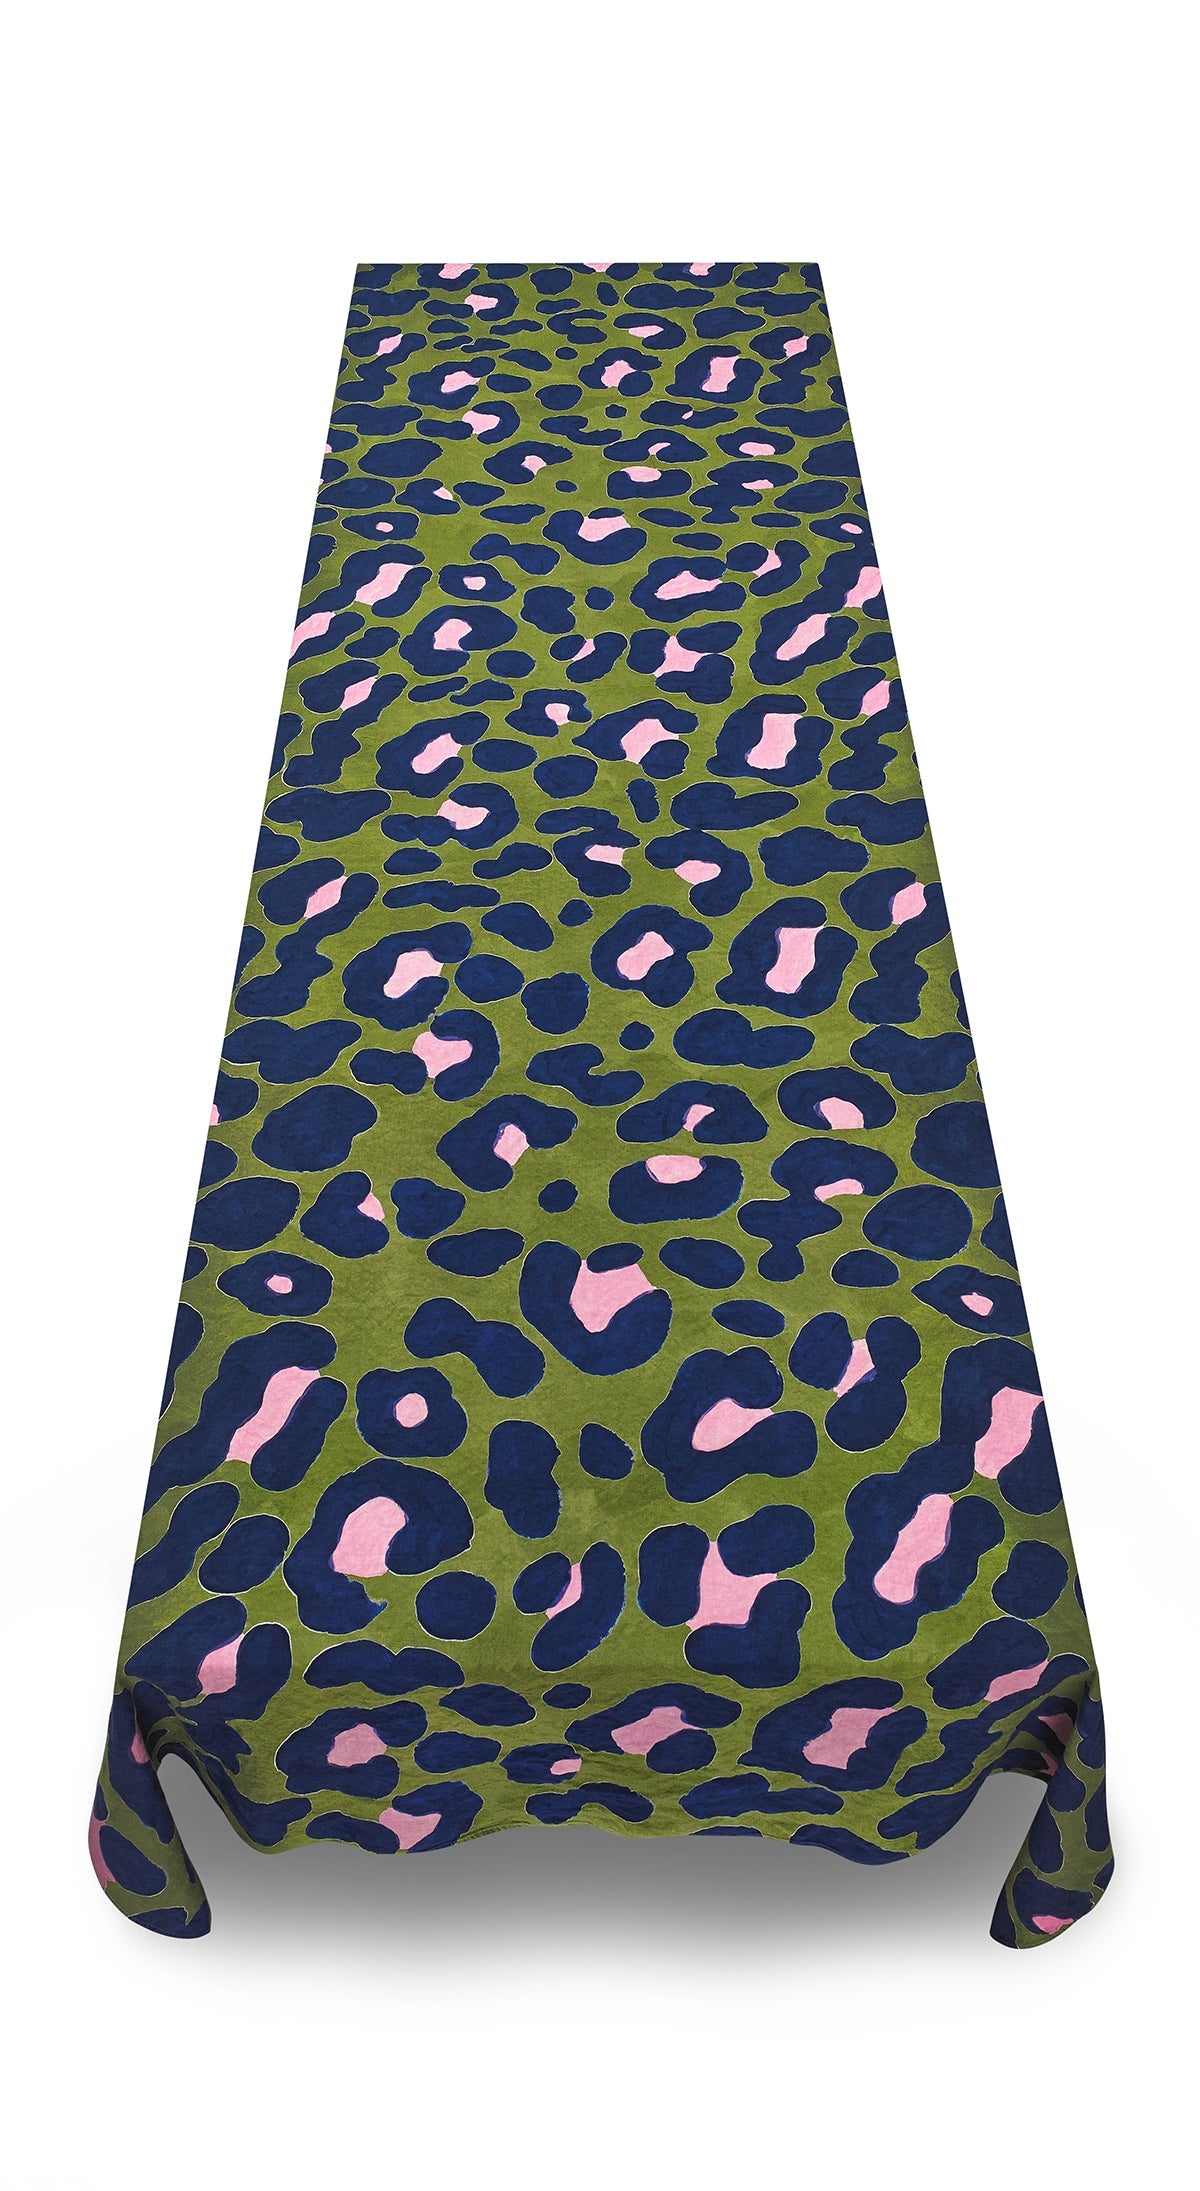 Fierce Leopard Linen Tablecloth in Avocado Green with Rose Pink And Ink Blue Spots